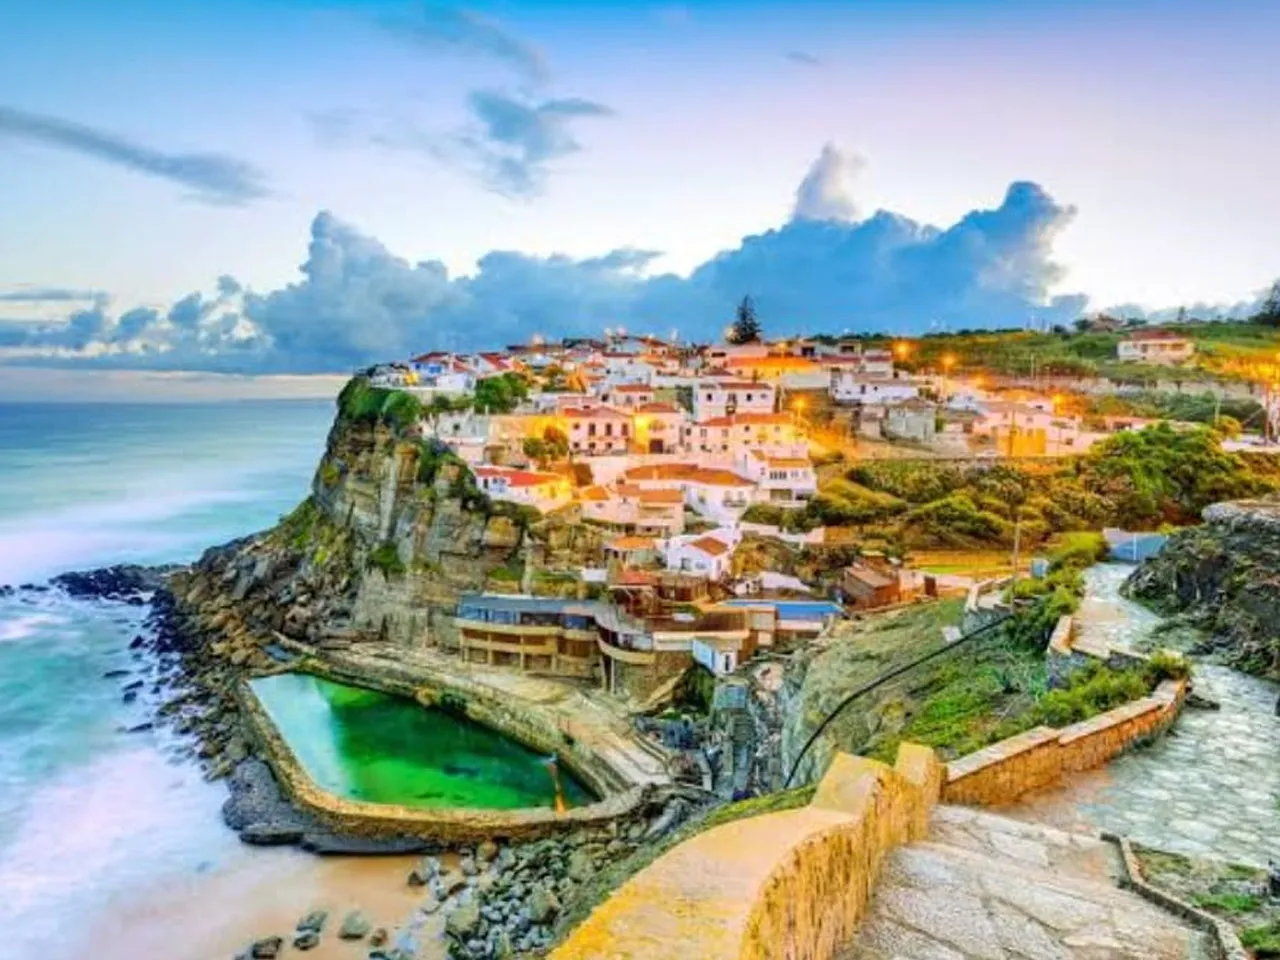 Portugal on Wheels-The best road trip of your lifetime